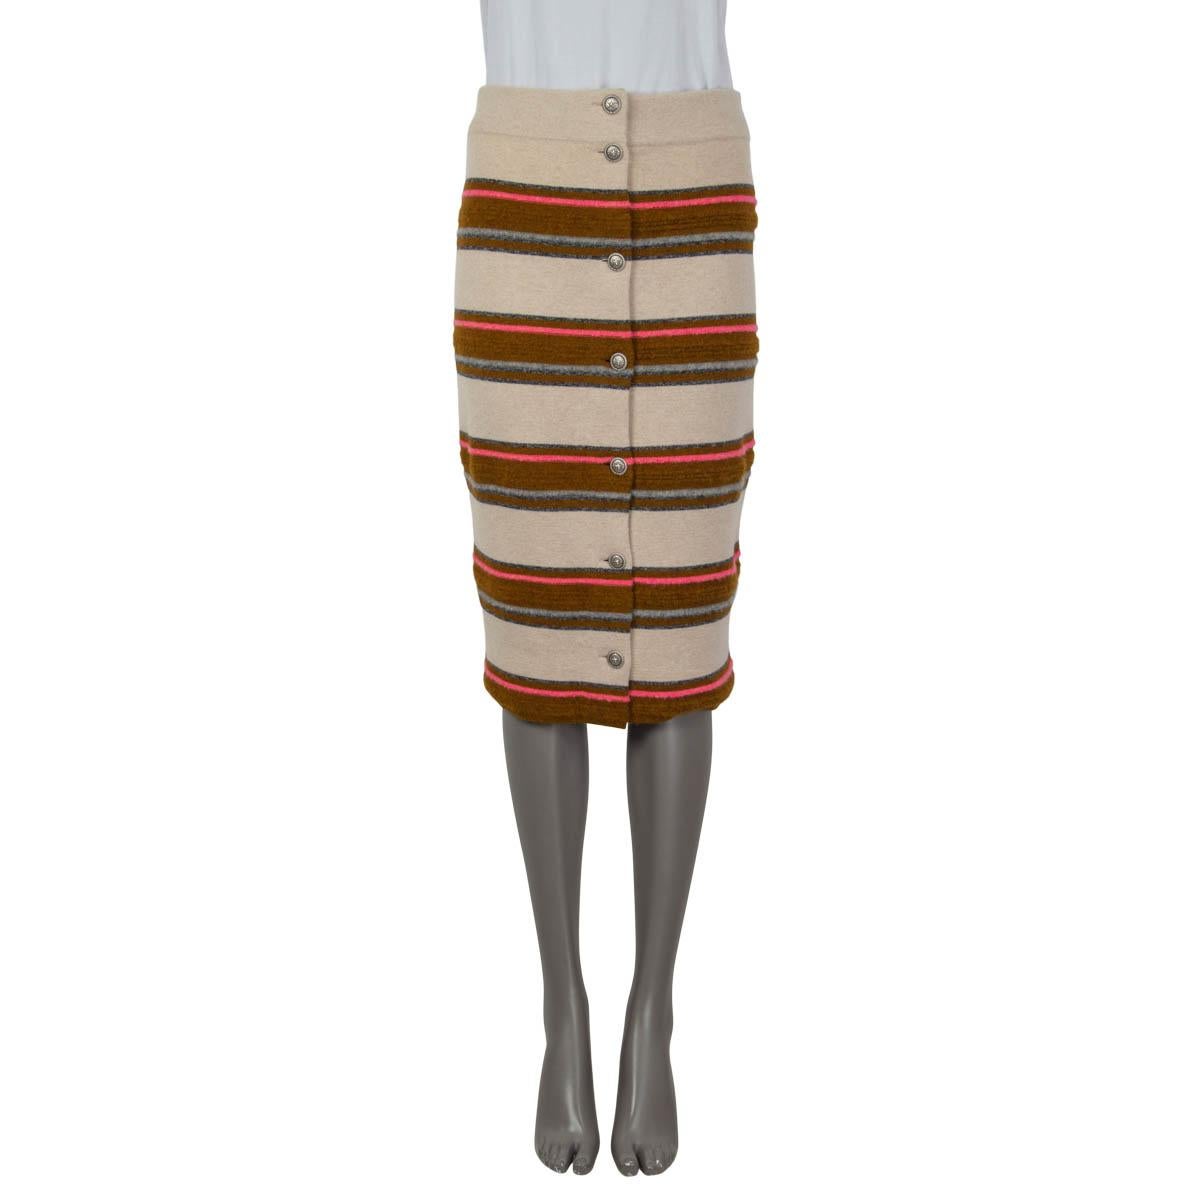 100% authentic Chanel 2014 Dallas striped skirt in ivory, brown, gray and pink cashmere (100%). Opens with seven buttons on the front. Unlined. Has been worn and is in excellent condition.

Measurements
Model	14A
Tag Size	36
Size	XS
Waist	72cm